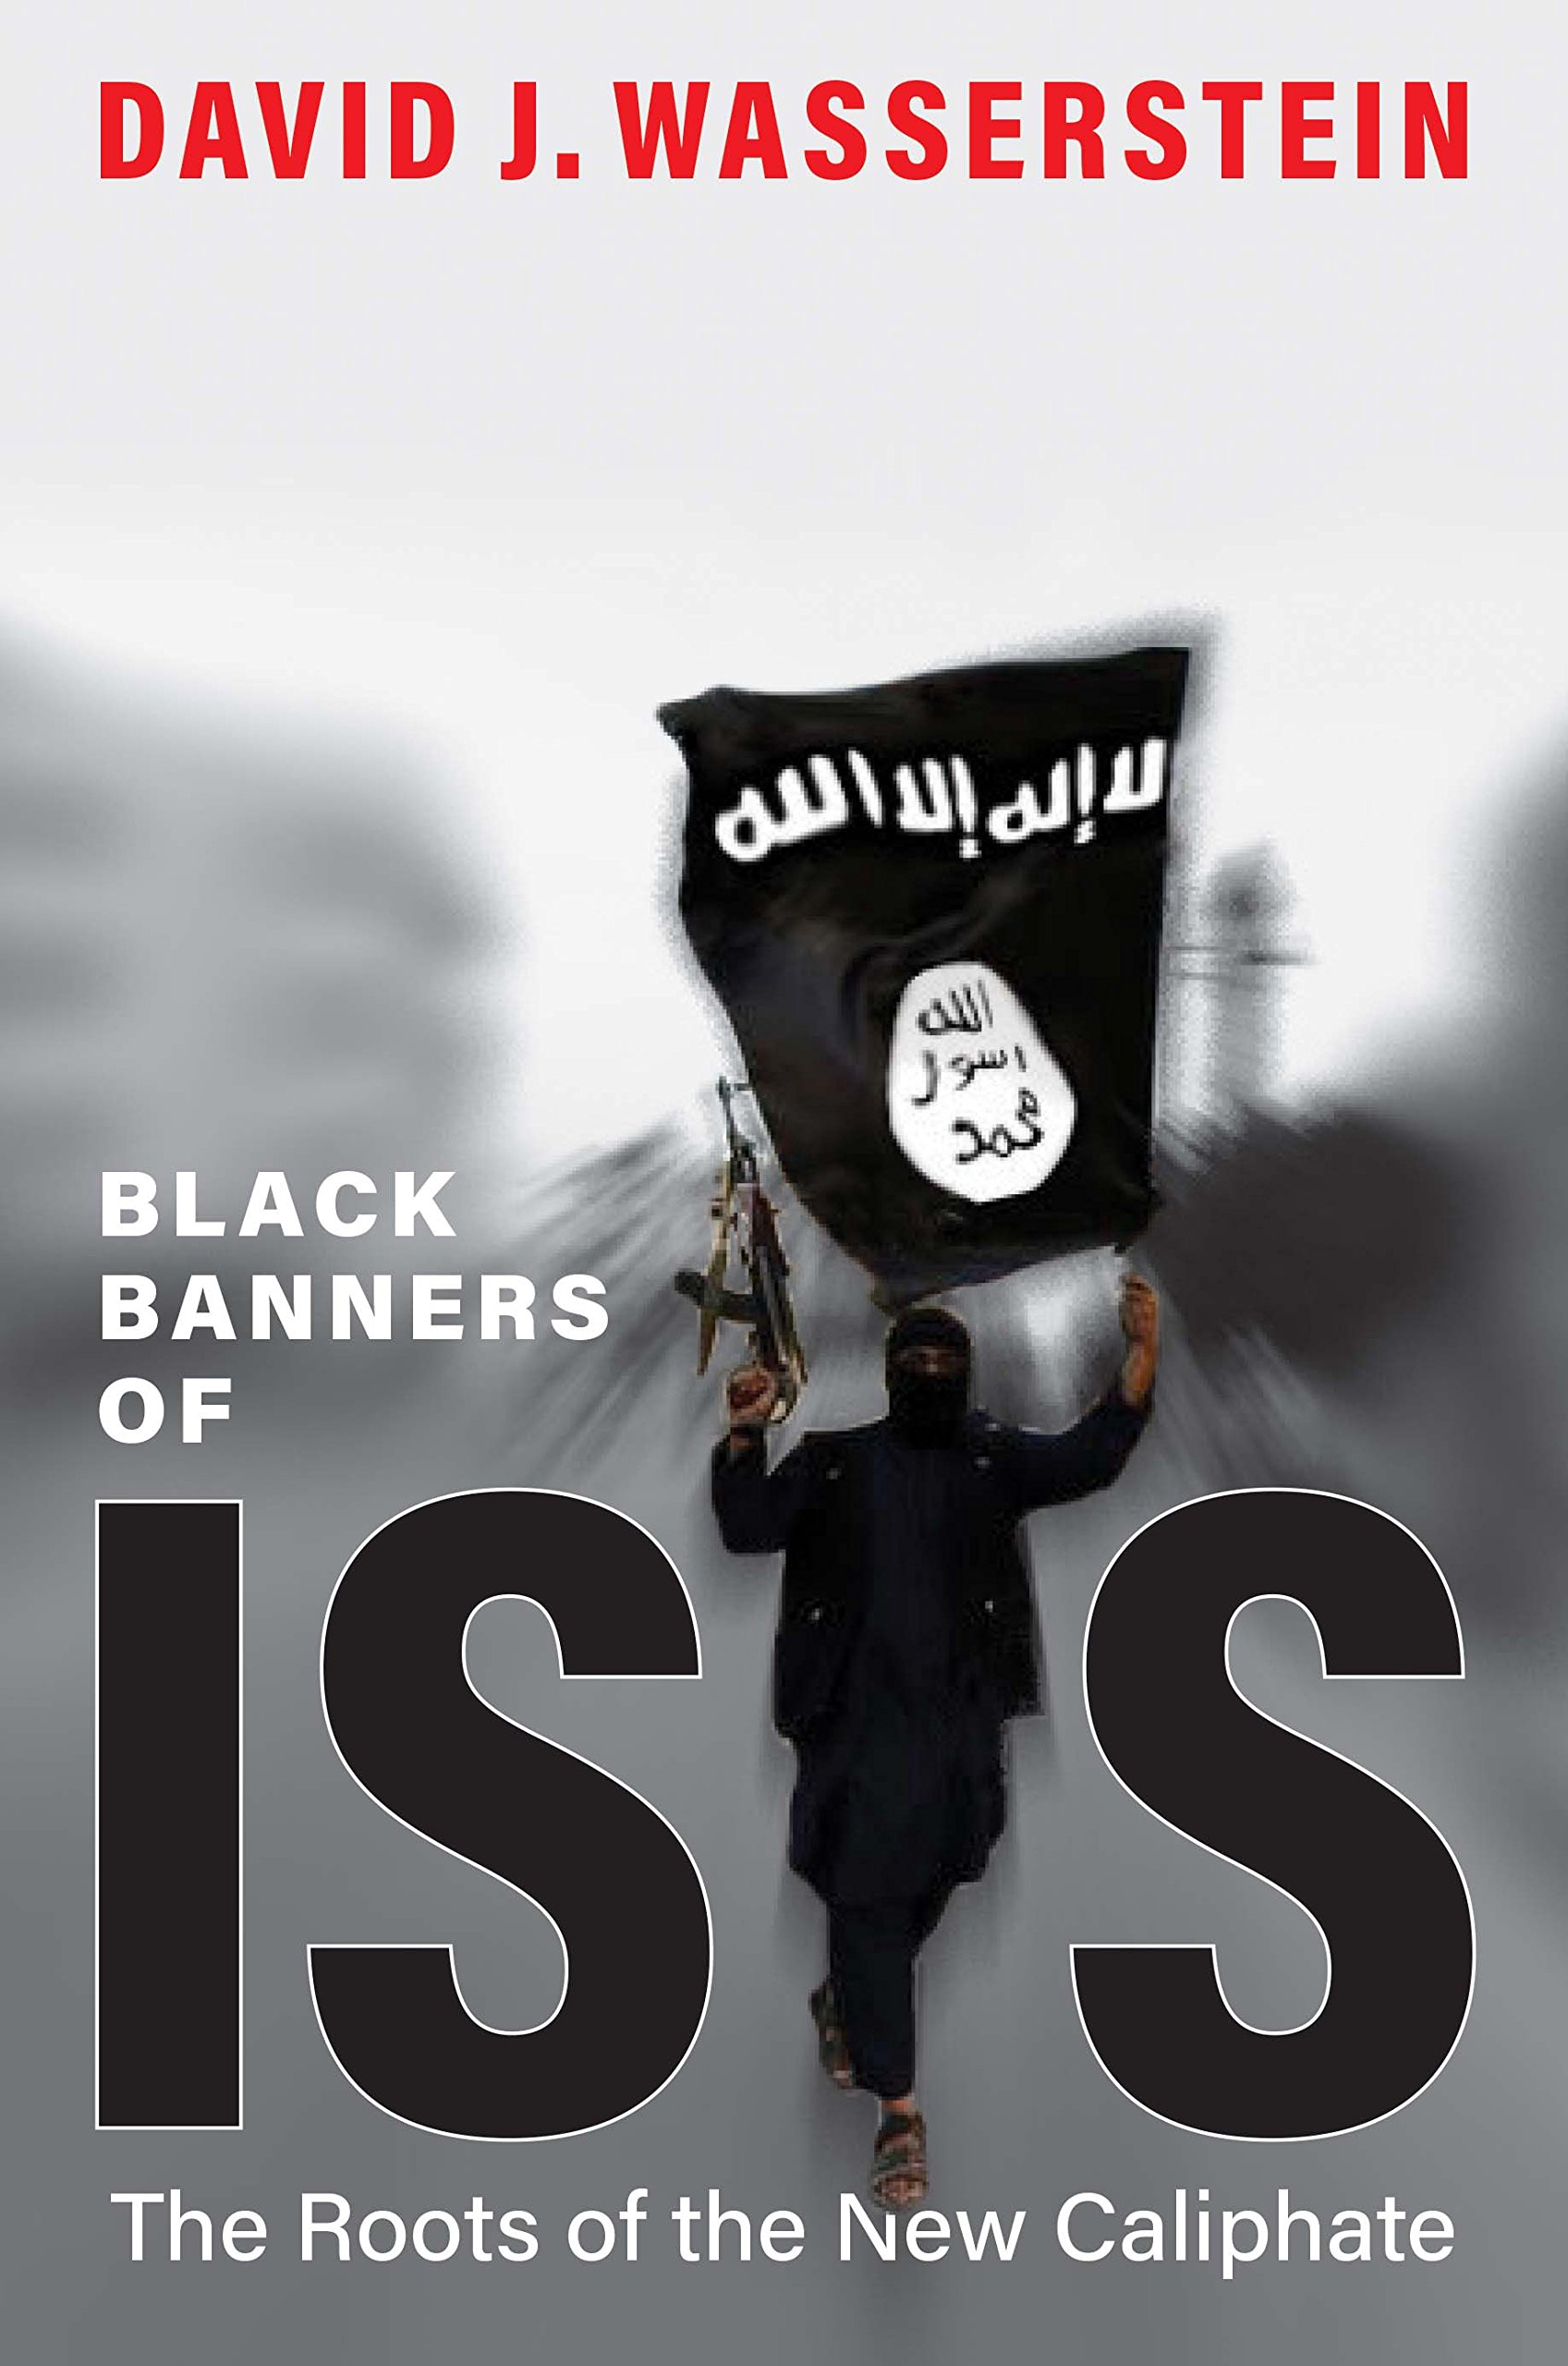 Black Banners of ISIS - The Roots of the New Caliphate